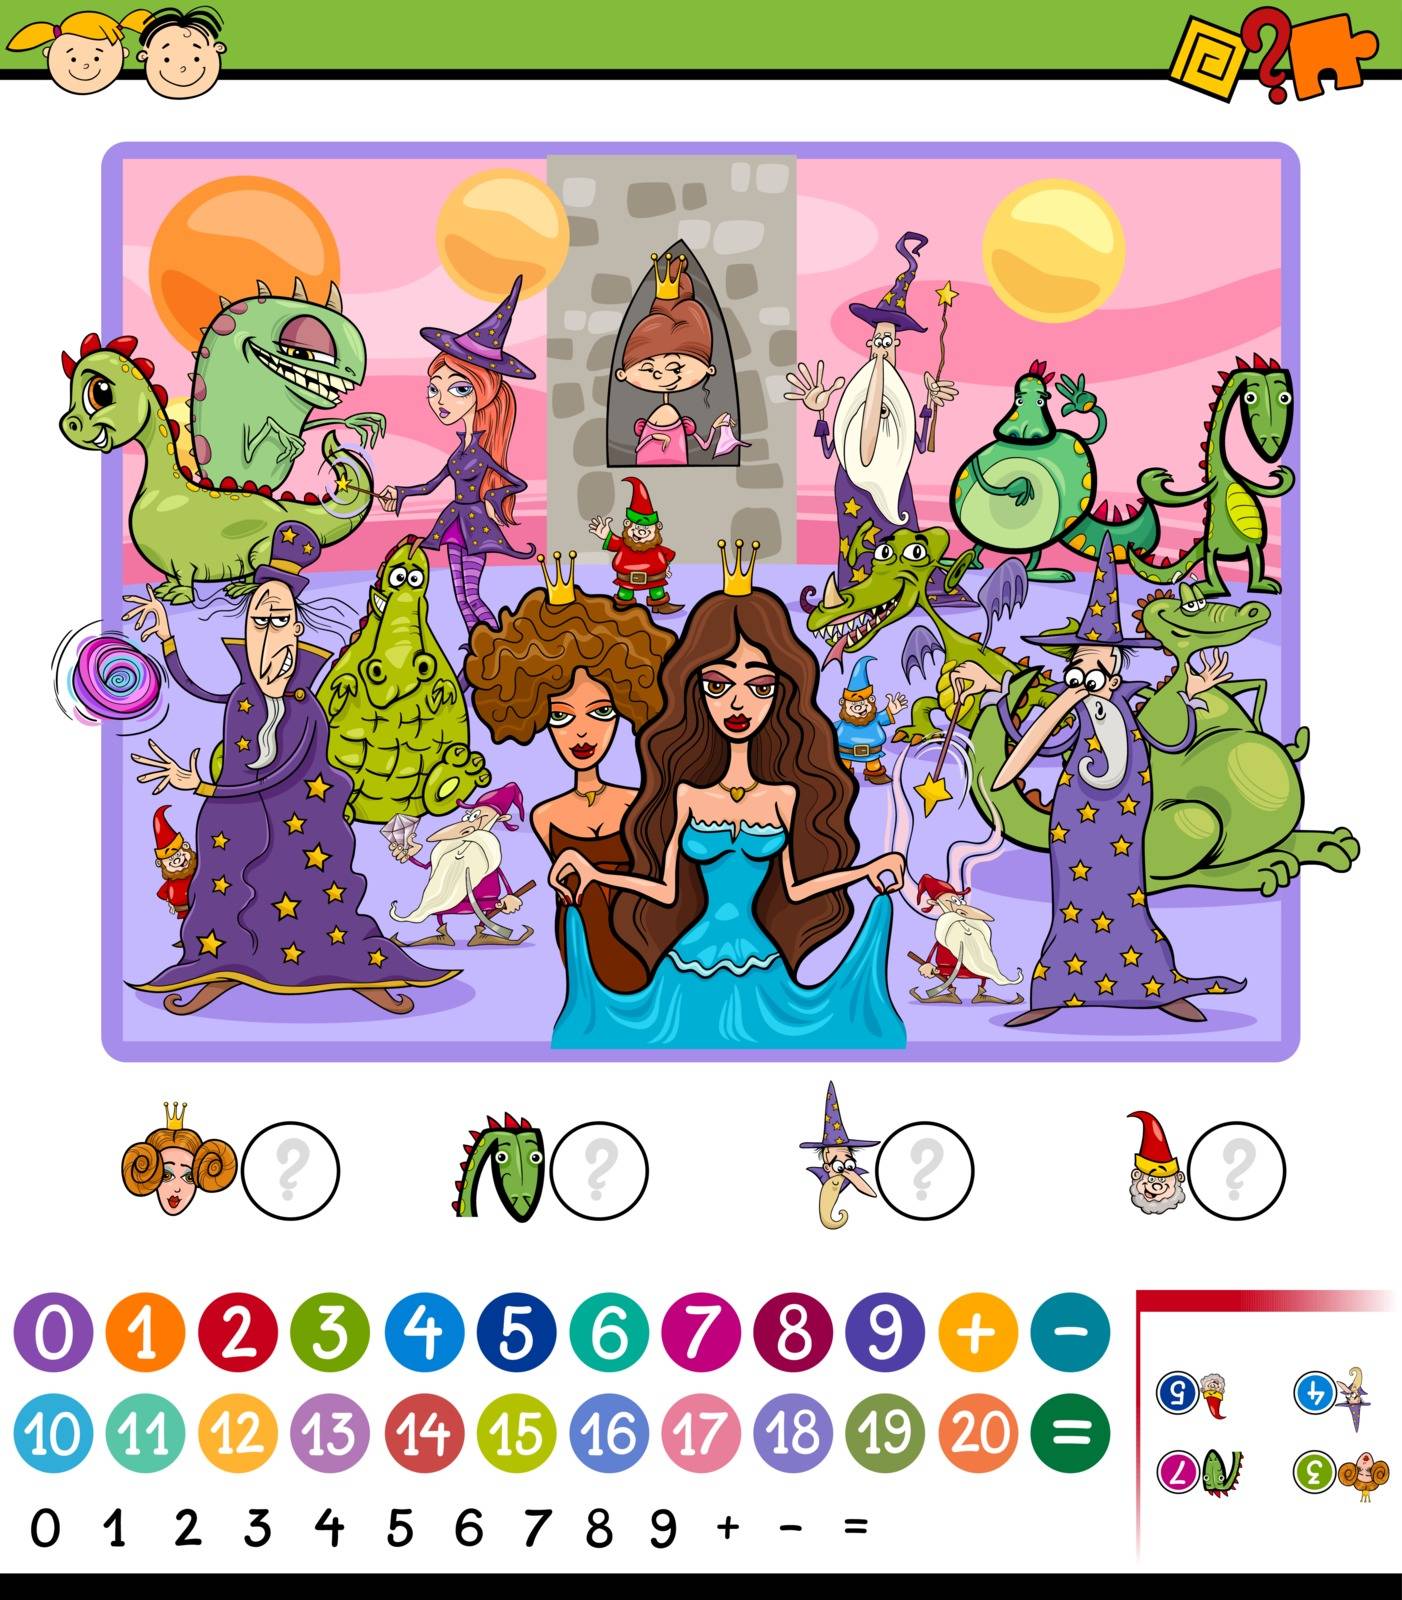 Cartoon Illustration of Education Mathematical Game for Preschool Children with Fantasy Characters